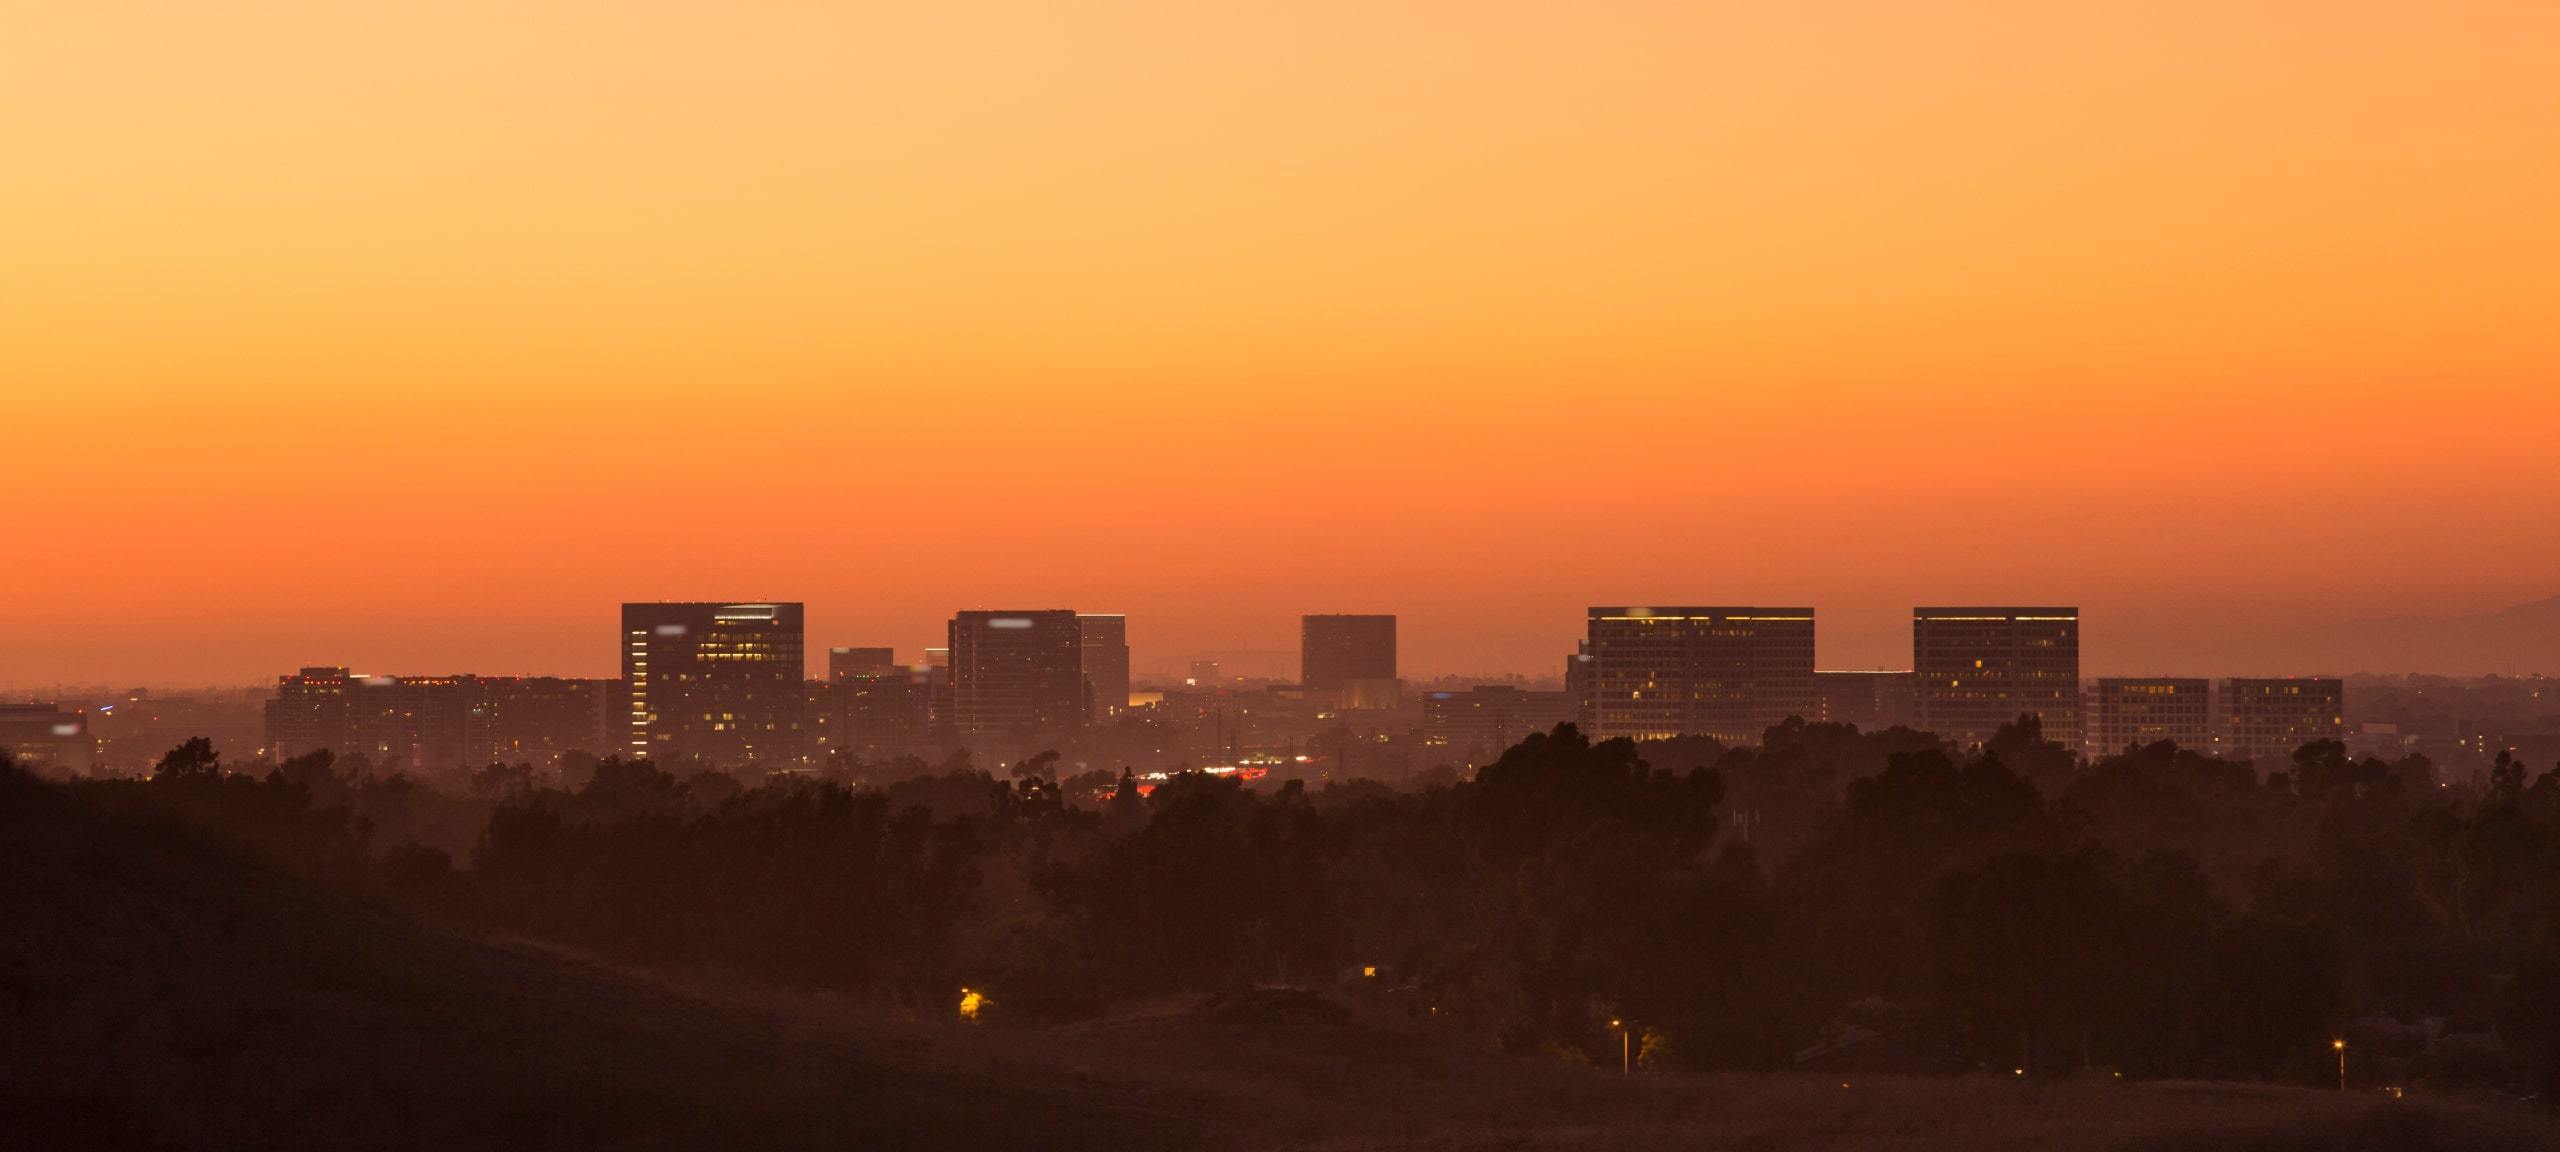 Sunset over Irvine, California near the Marquee at Park Place